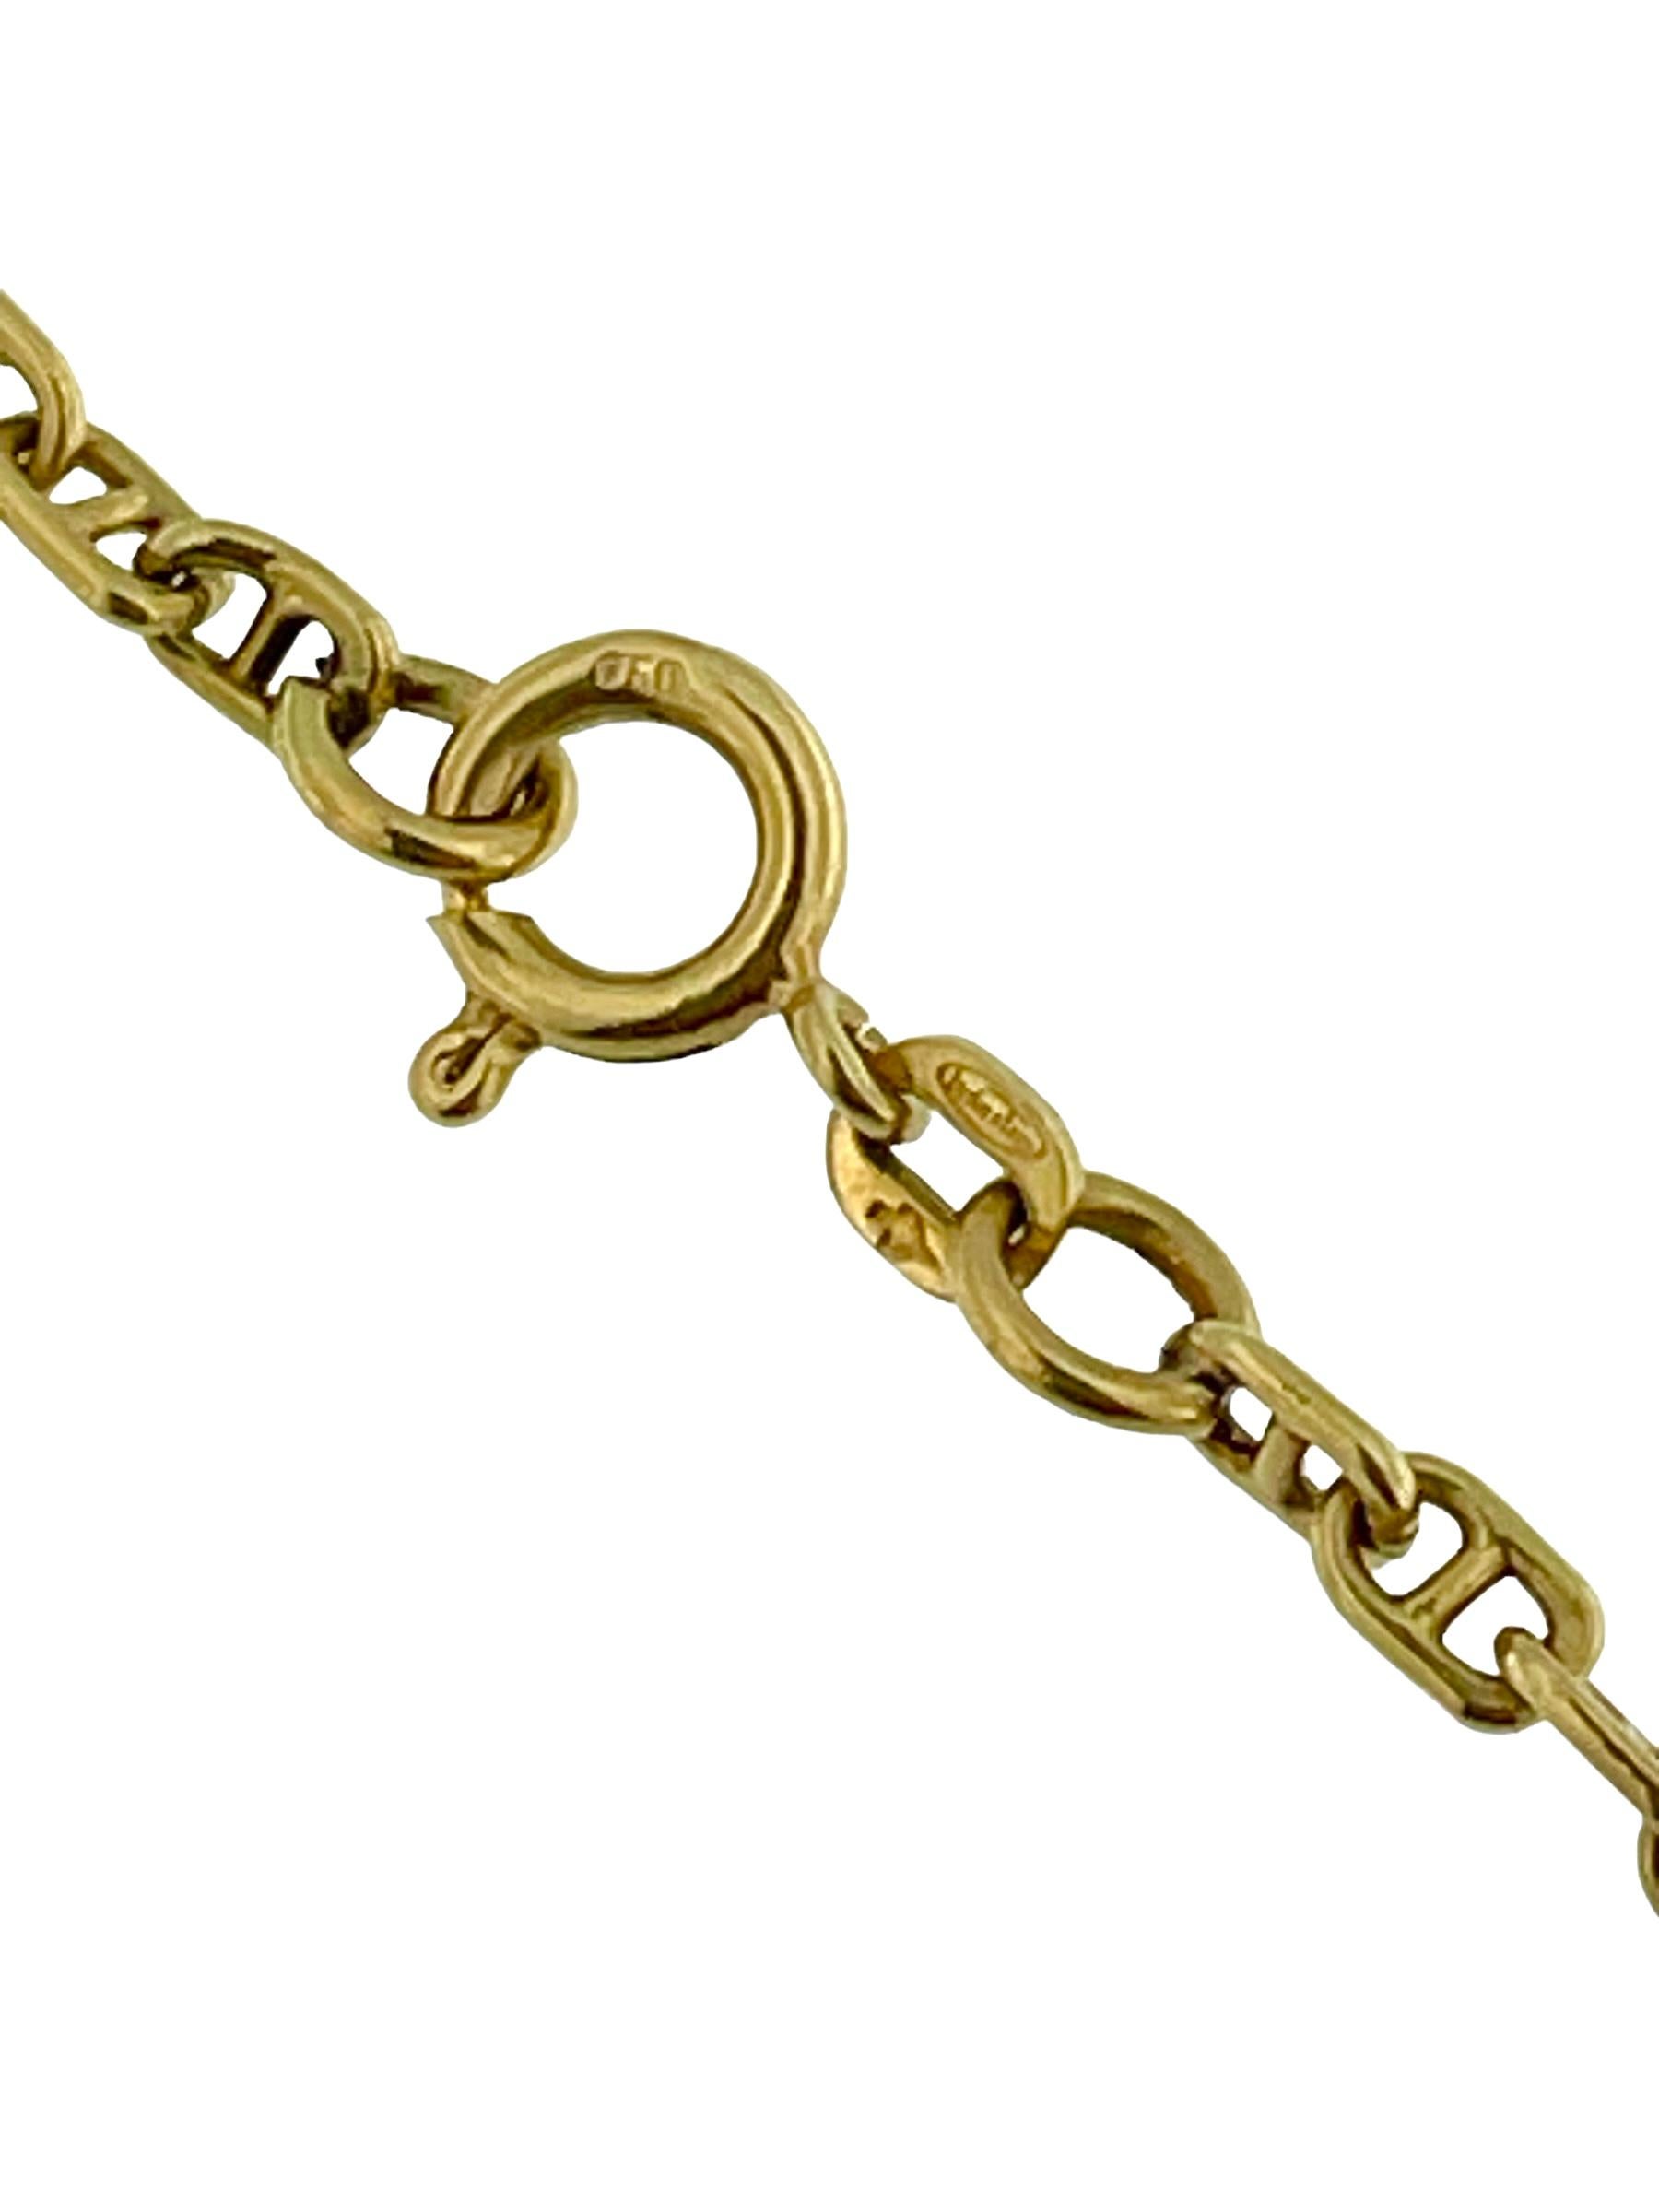 Italian Mariner Link Chain Yellow Gold by Balestra In Good Condition For Sale In Esch-Sur-Alzette, LU